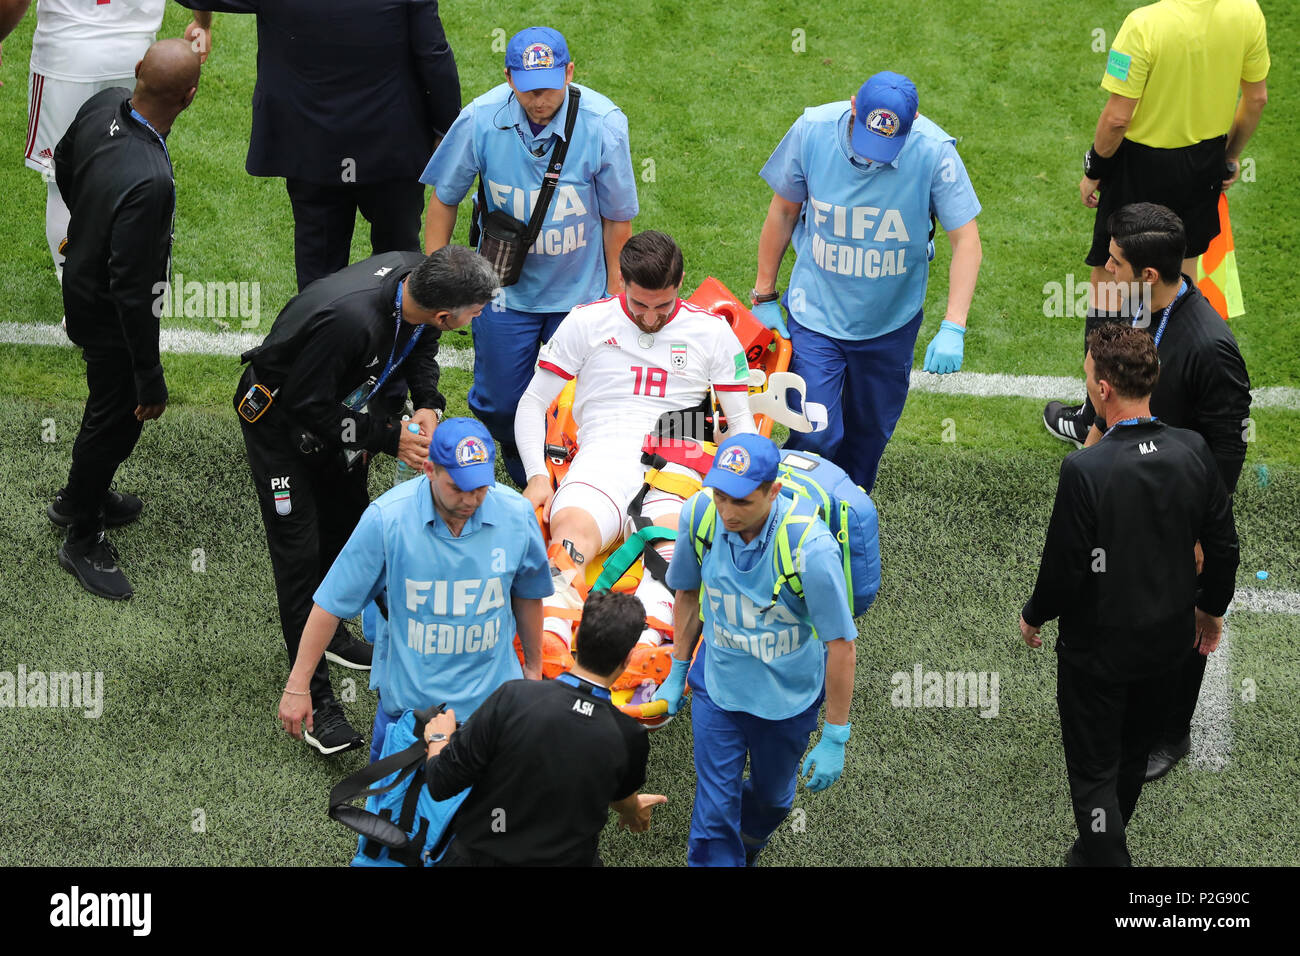 Saint Petersburg, Russia. 15th June, 2018. Iran's Alireza Jahanbakhsh carried off the pitch after an injury during the FIFA World Cup 2018 Group B soccer match between Morocco and Iran at the Saint Petersburg Stadium, in Saint Petersburg, Russia, 15 June 2018. Credit: Saeid Zareian/dpa/Alamy Live News Stock Photo